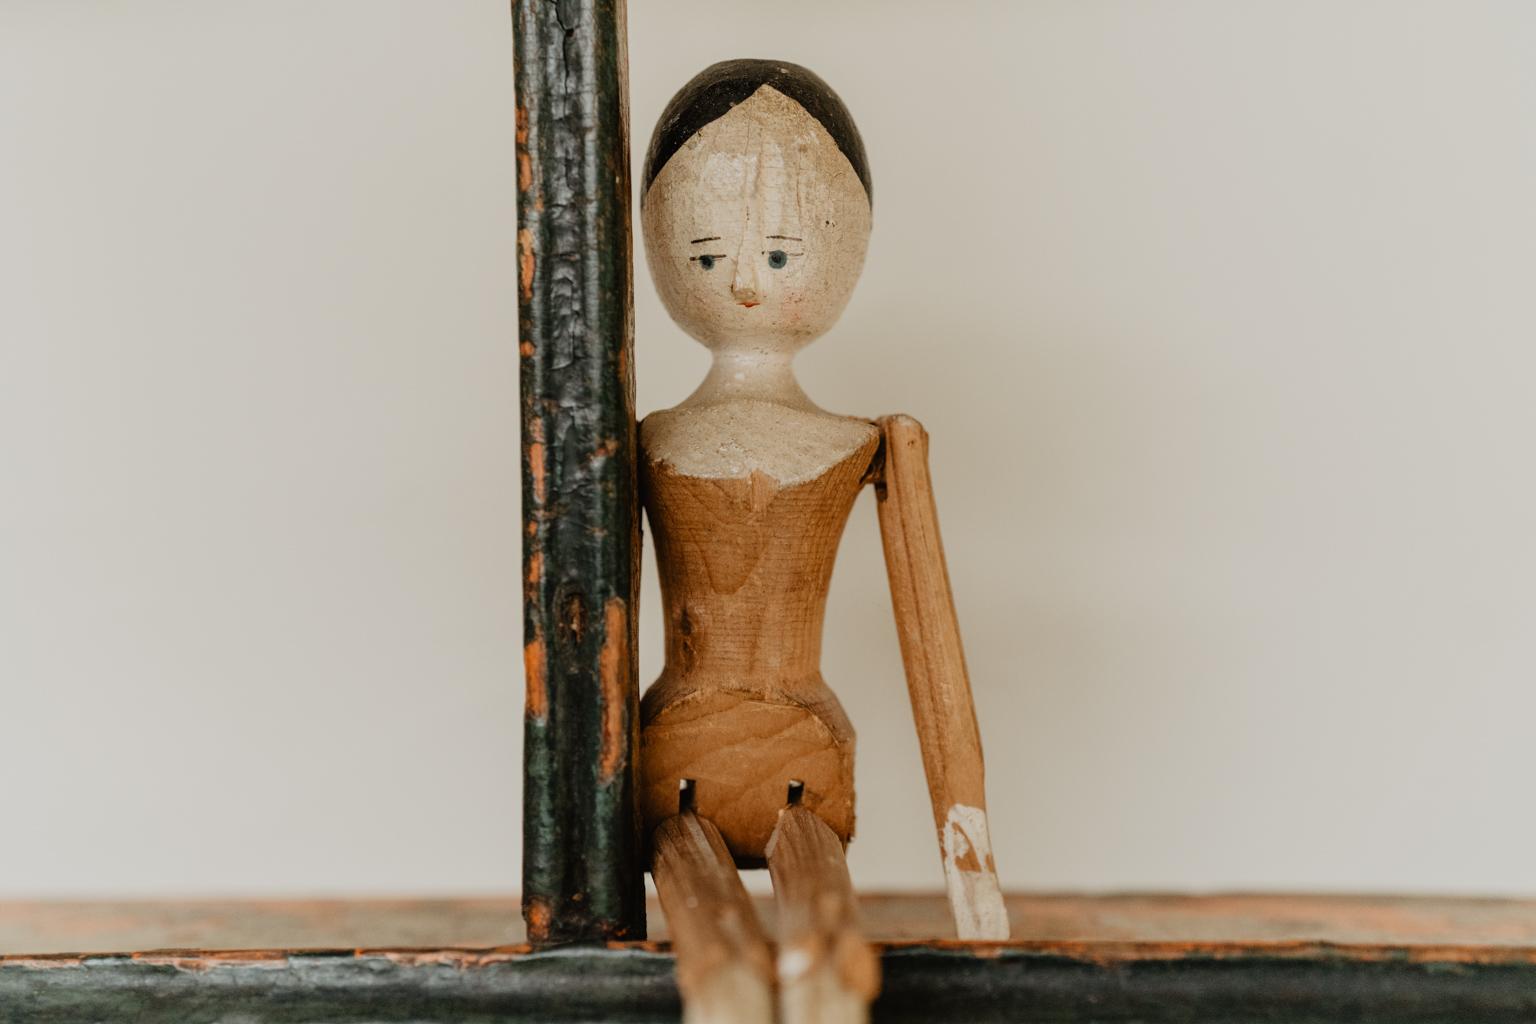 European Collection of Wooden Peg Dolls